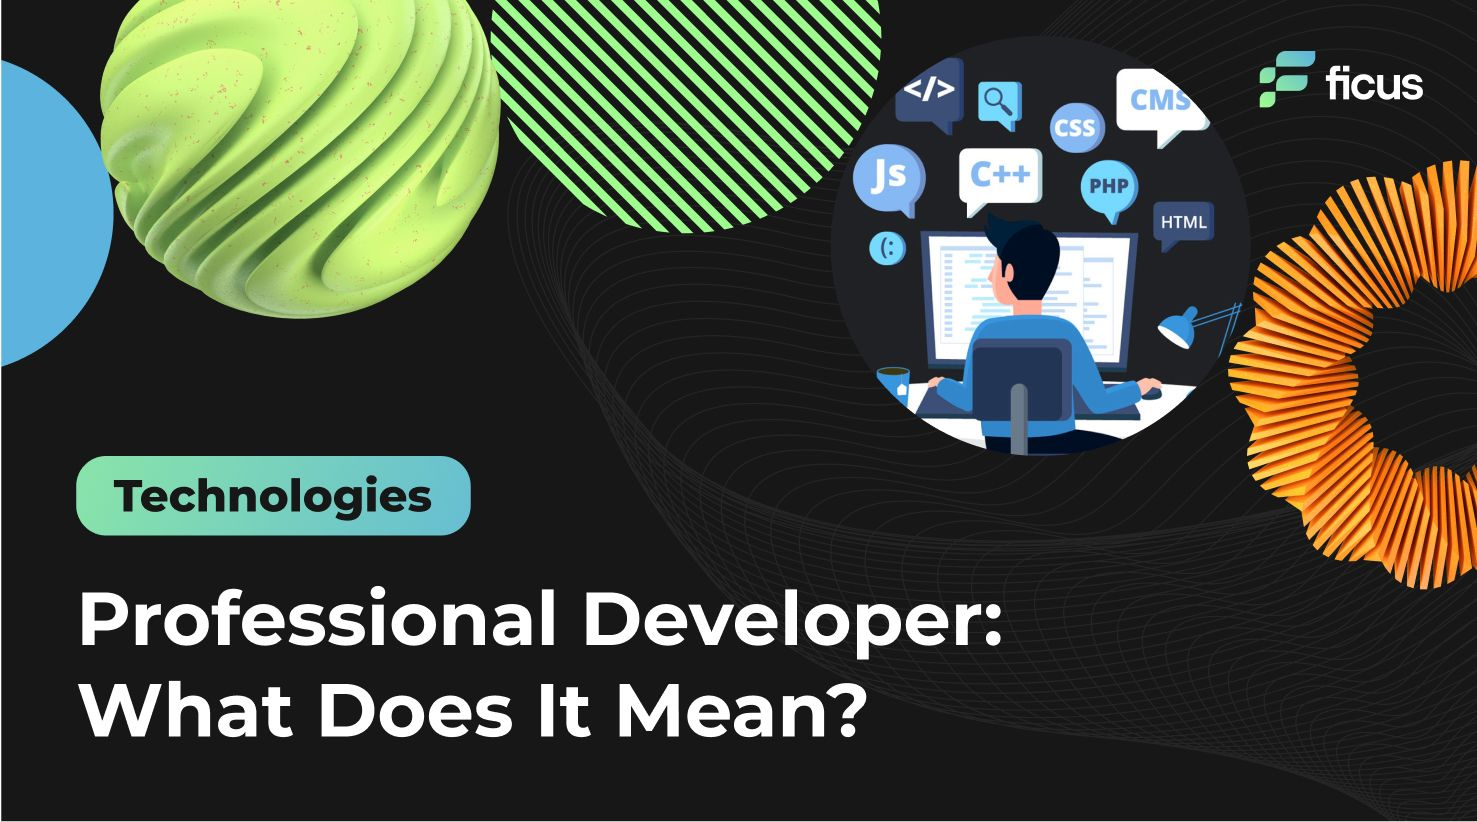 Professional Developer: What Does It Mean?